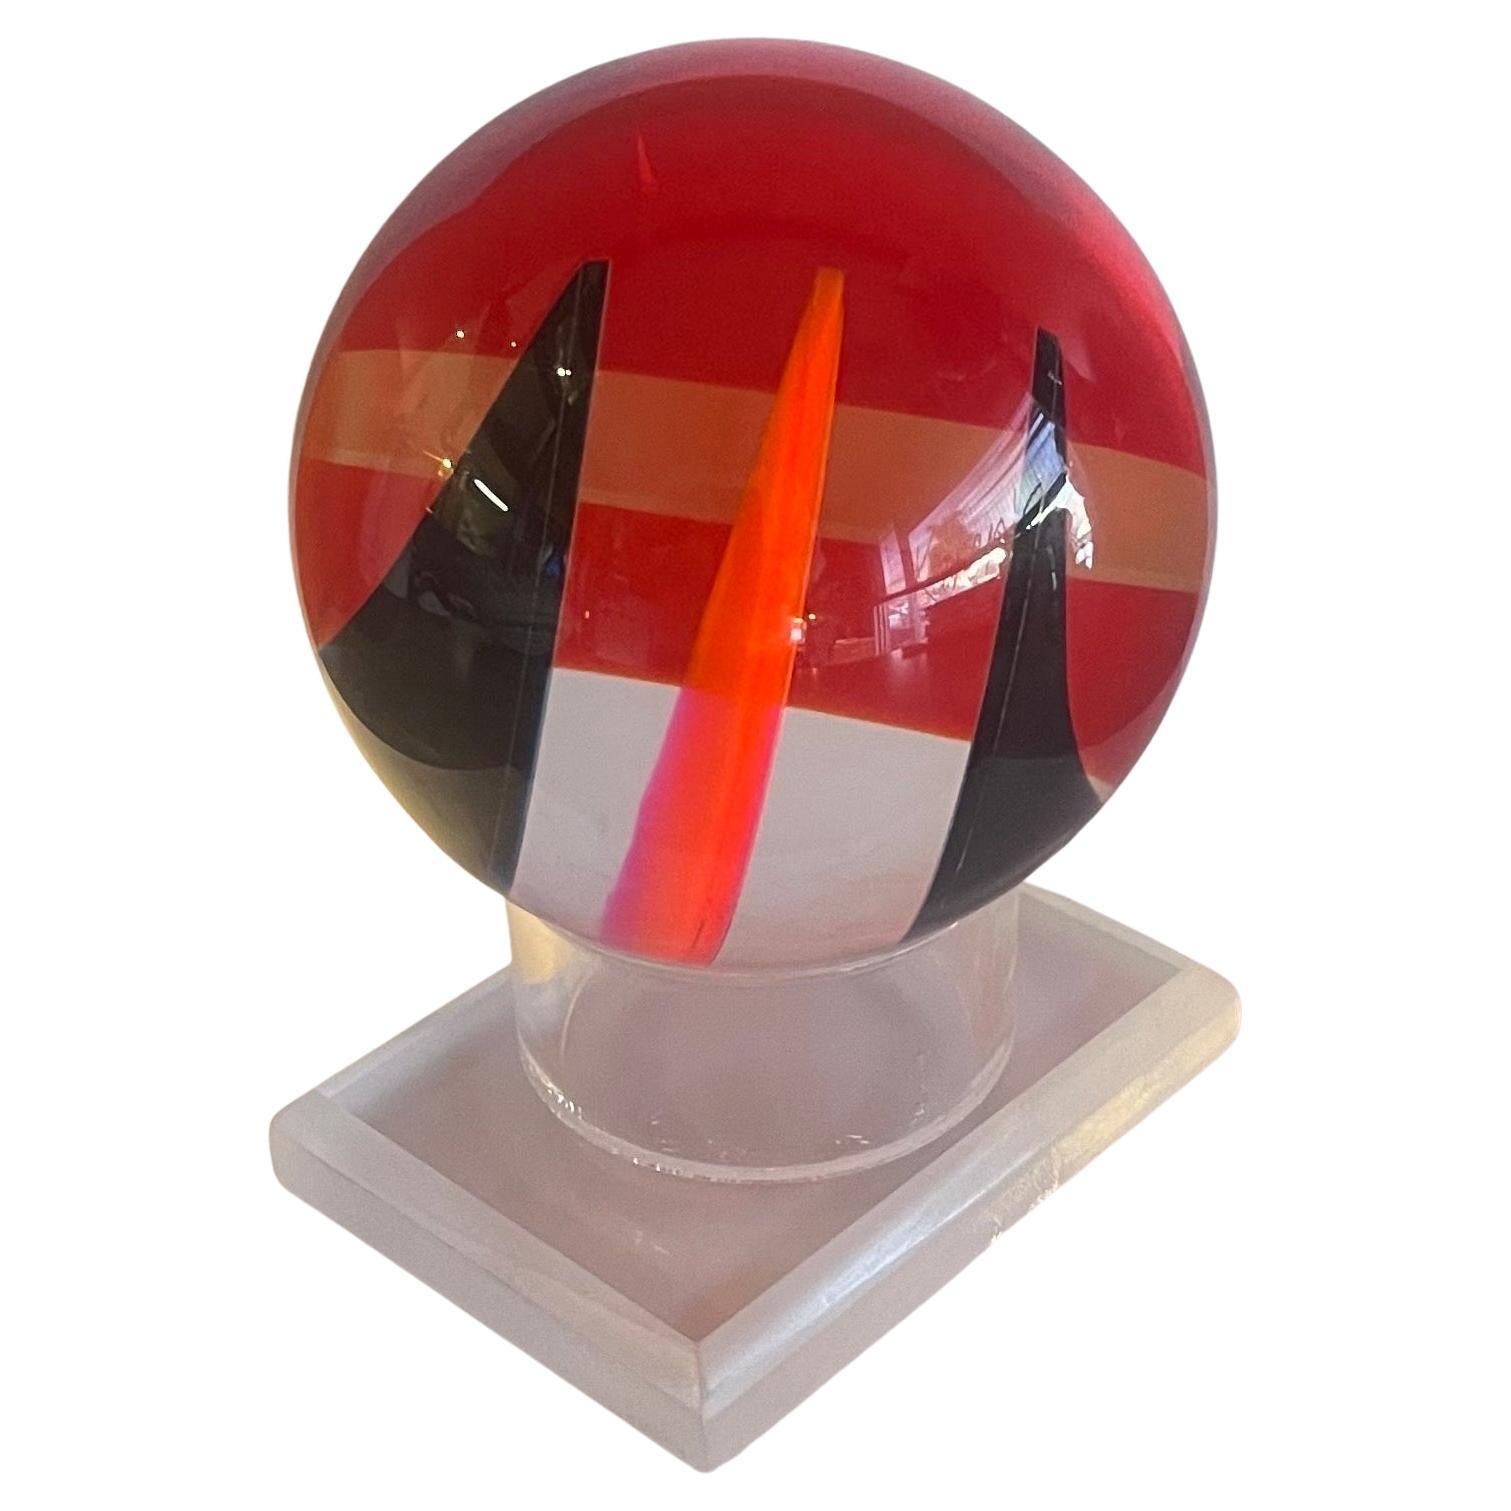 Op Art acrylic sphere sculpture on lucite base by Vasa Mihich, circa 1990. The optical look is changed by rotating the piece and letting the light refract at different angles; there are literally hundreds of different looks that can be created. The